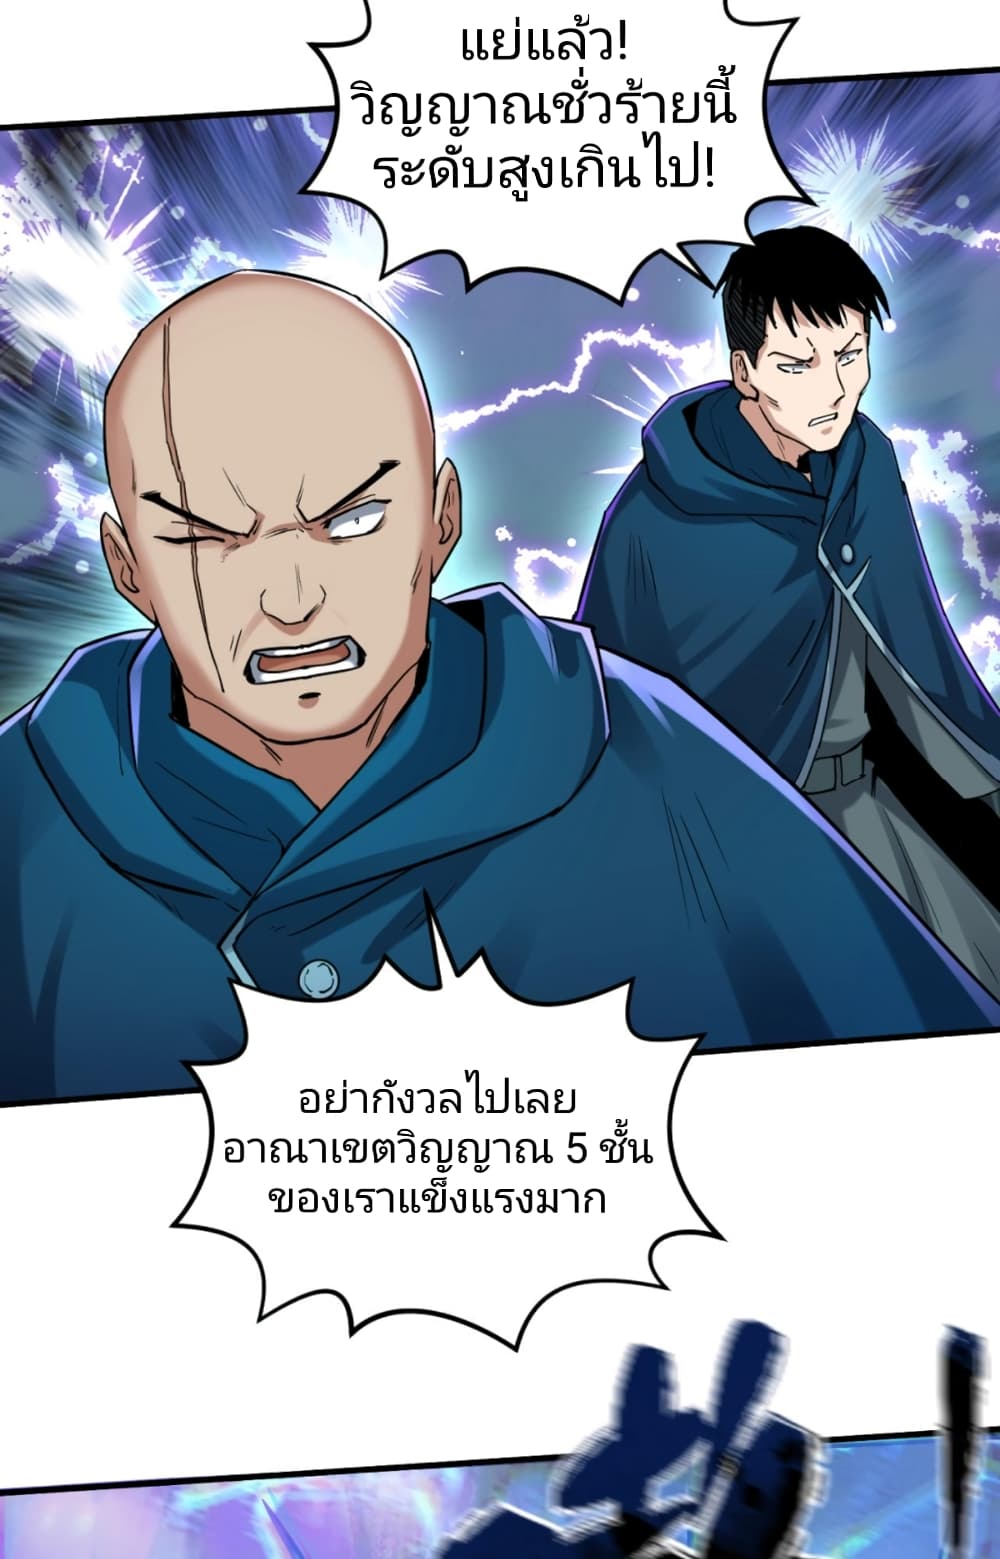 The Age of Ghost Spirits à¸à¸­à¸à¸à¸µà¹ 20 (31)